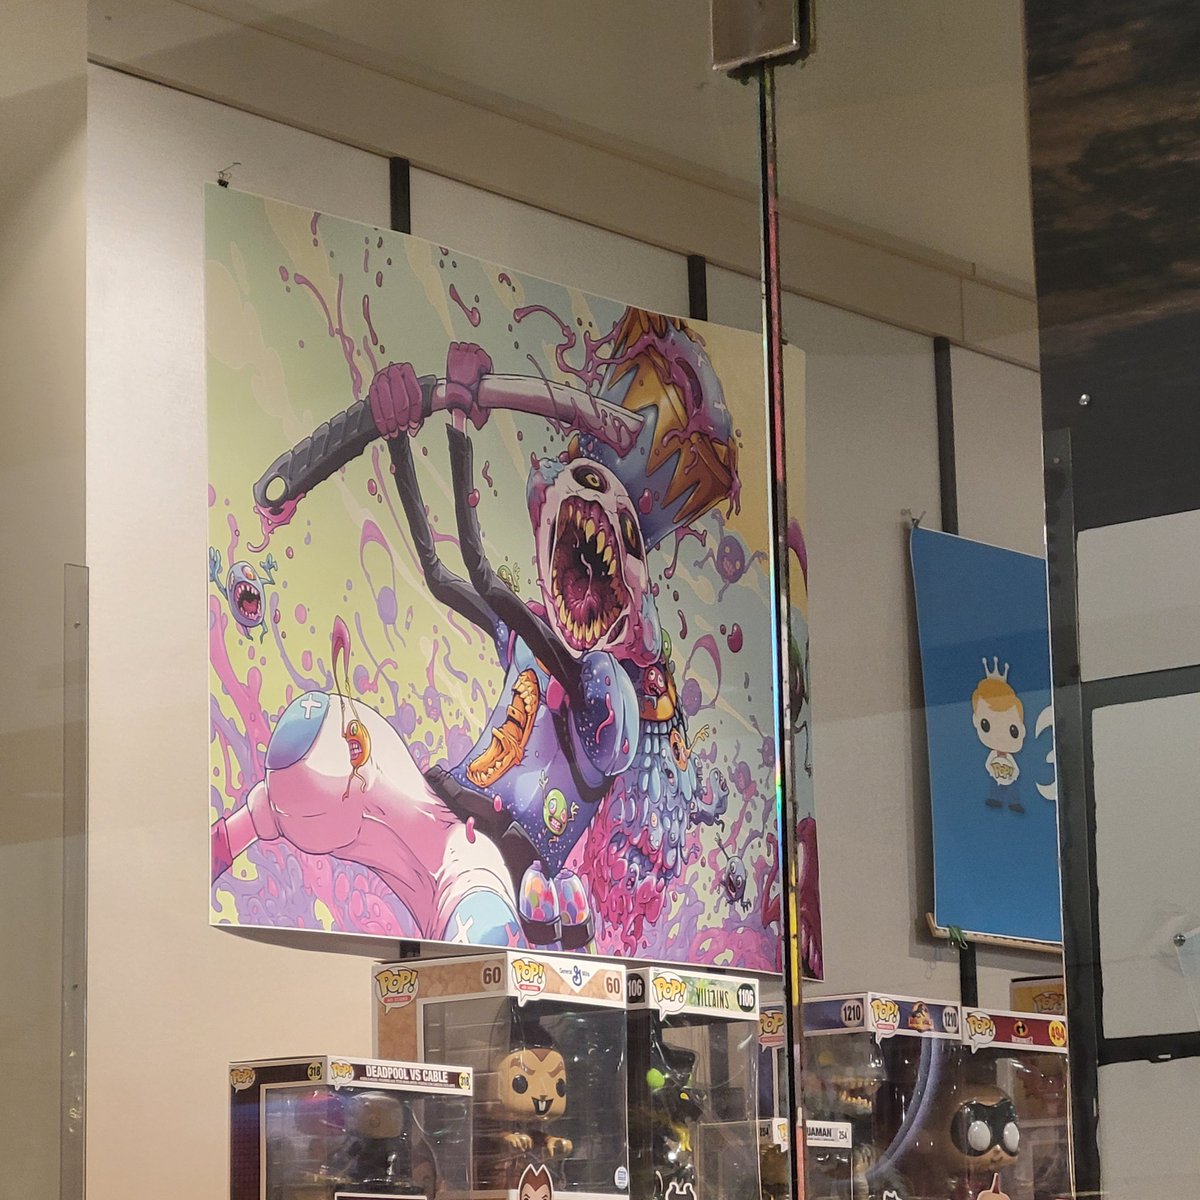 LOOK WHAT THEY HAVE HANGING ON THE WALL AT THE MALL!